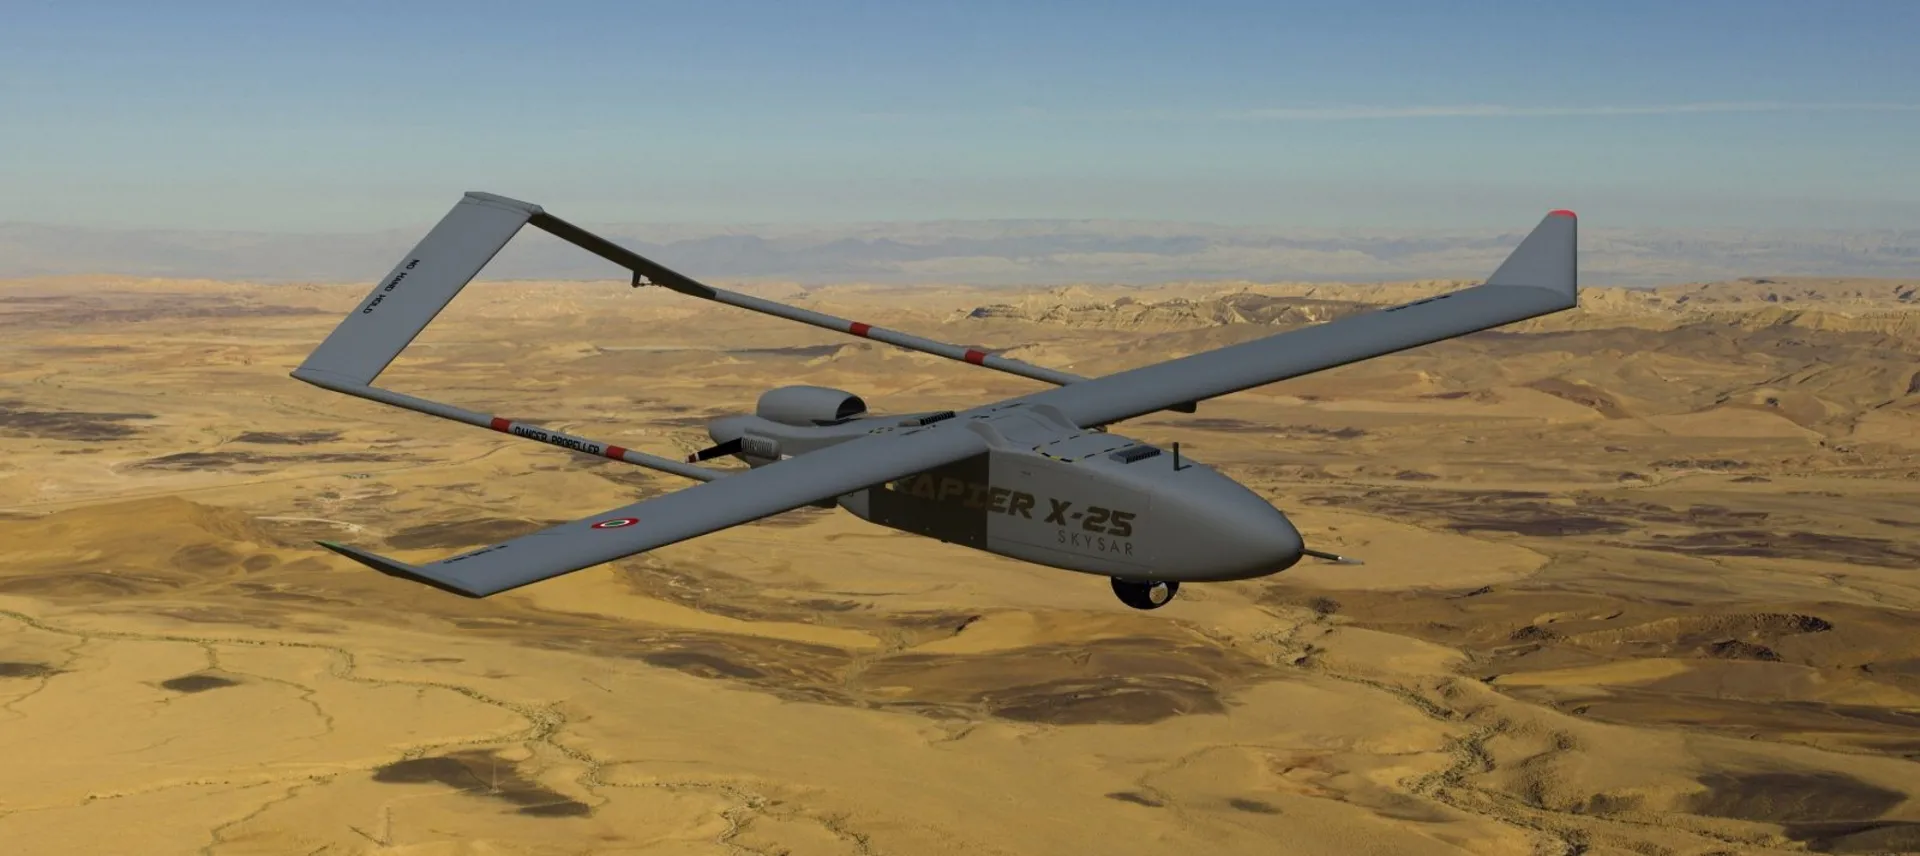 SkyEye-unmanned aircraft systems_hero-image-Dassault Systèmes